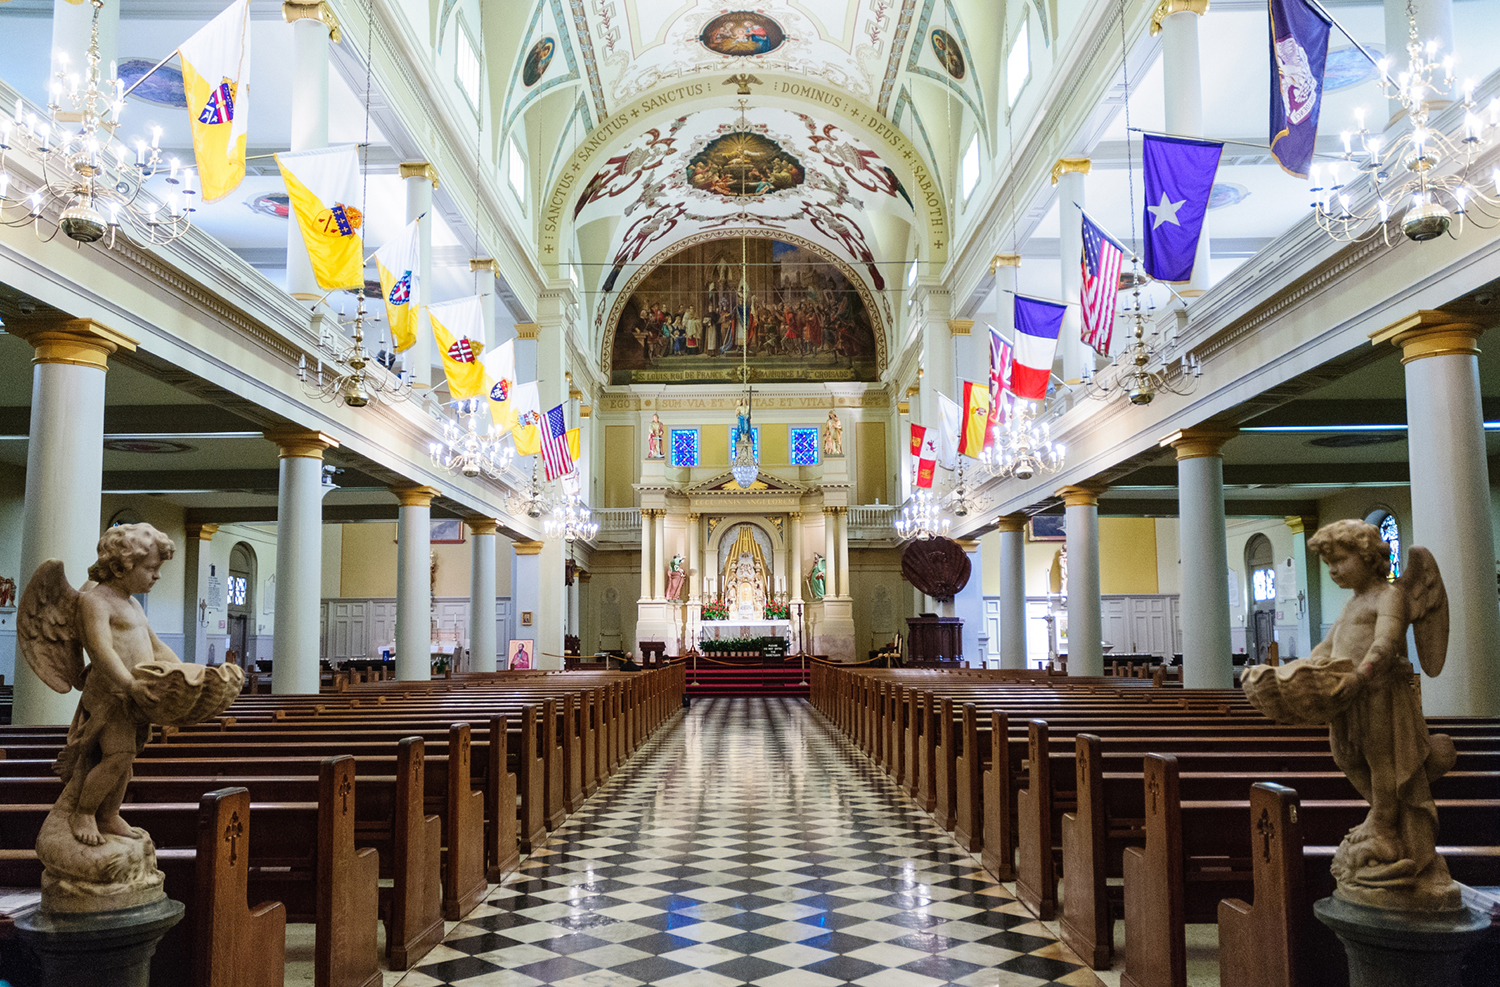 View of cathedral Interior from center aisle.